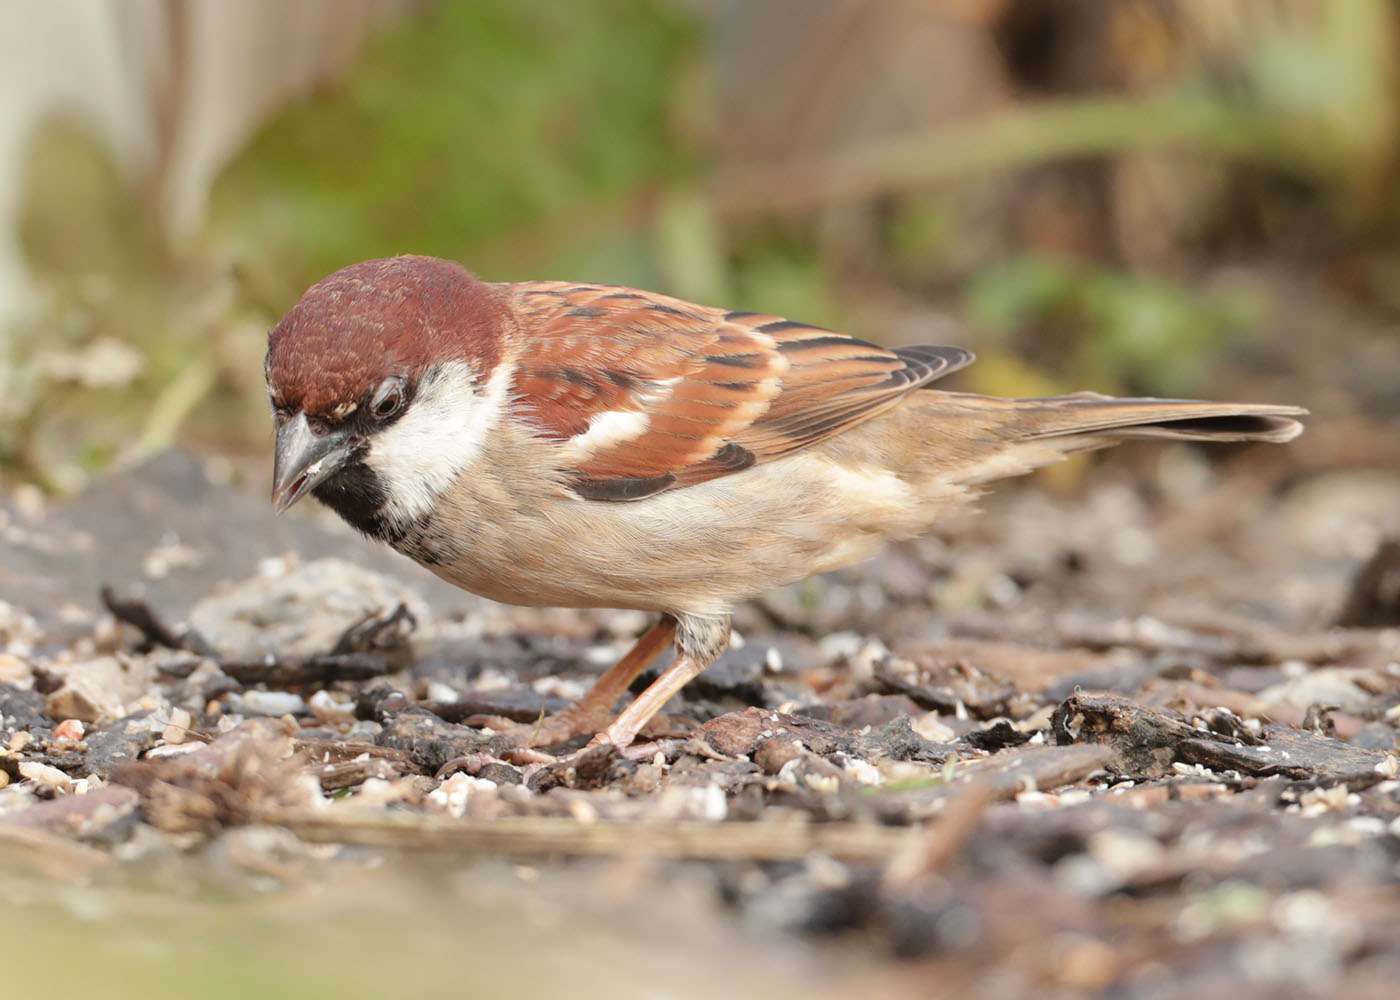 Sparrow sp by Steve Hopper at South Brent